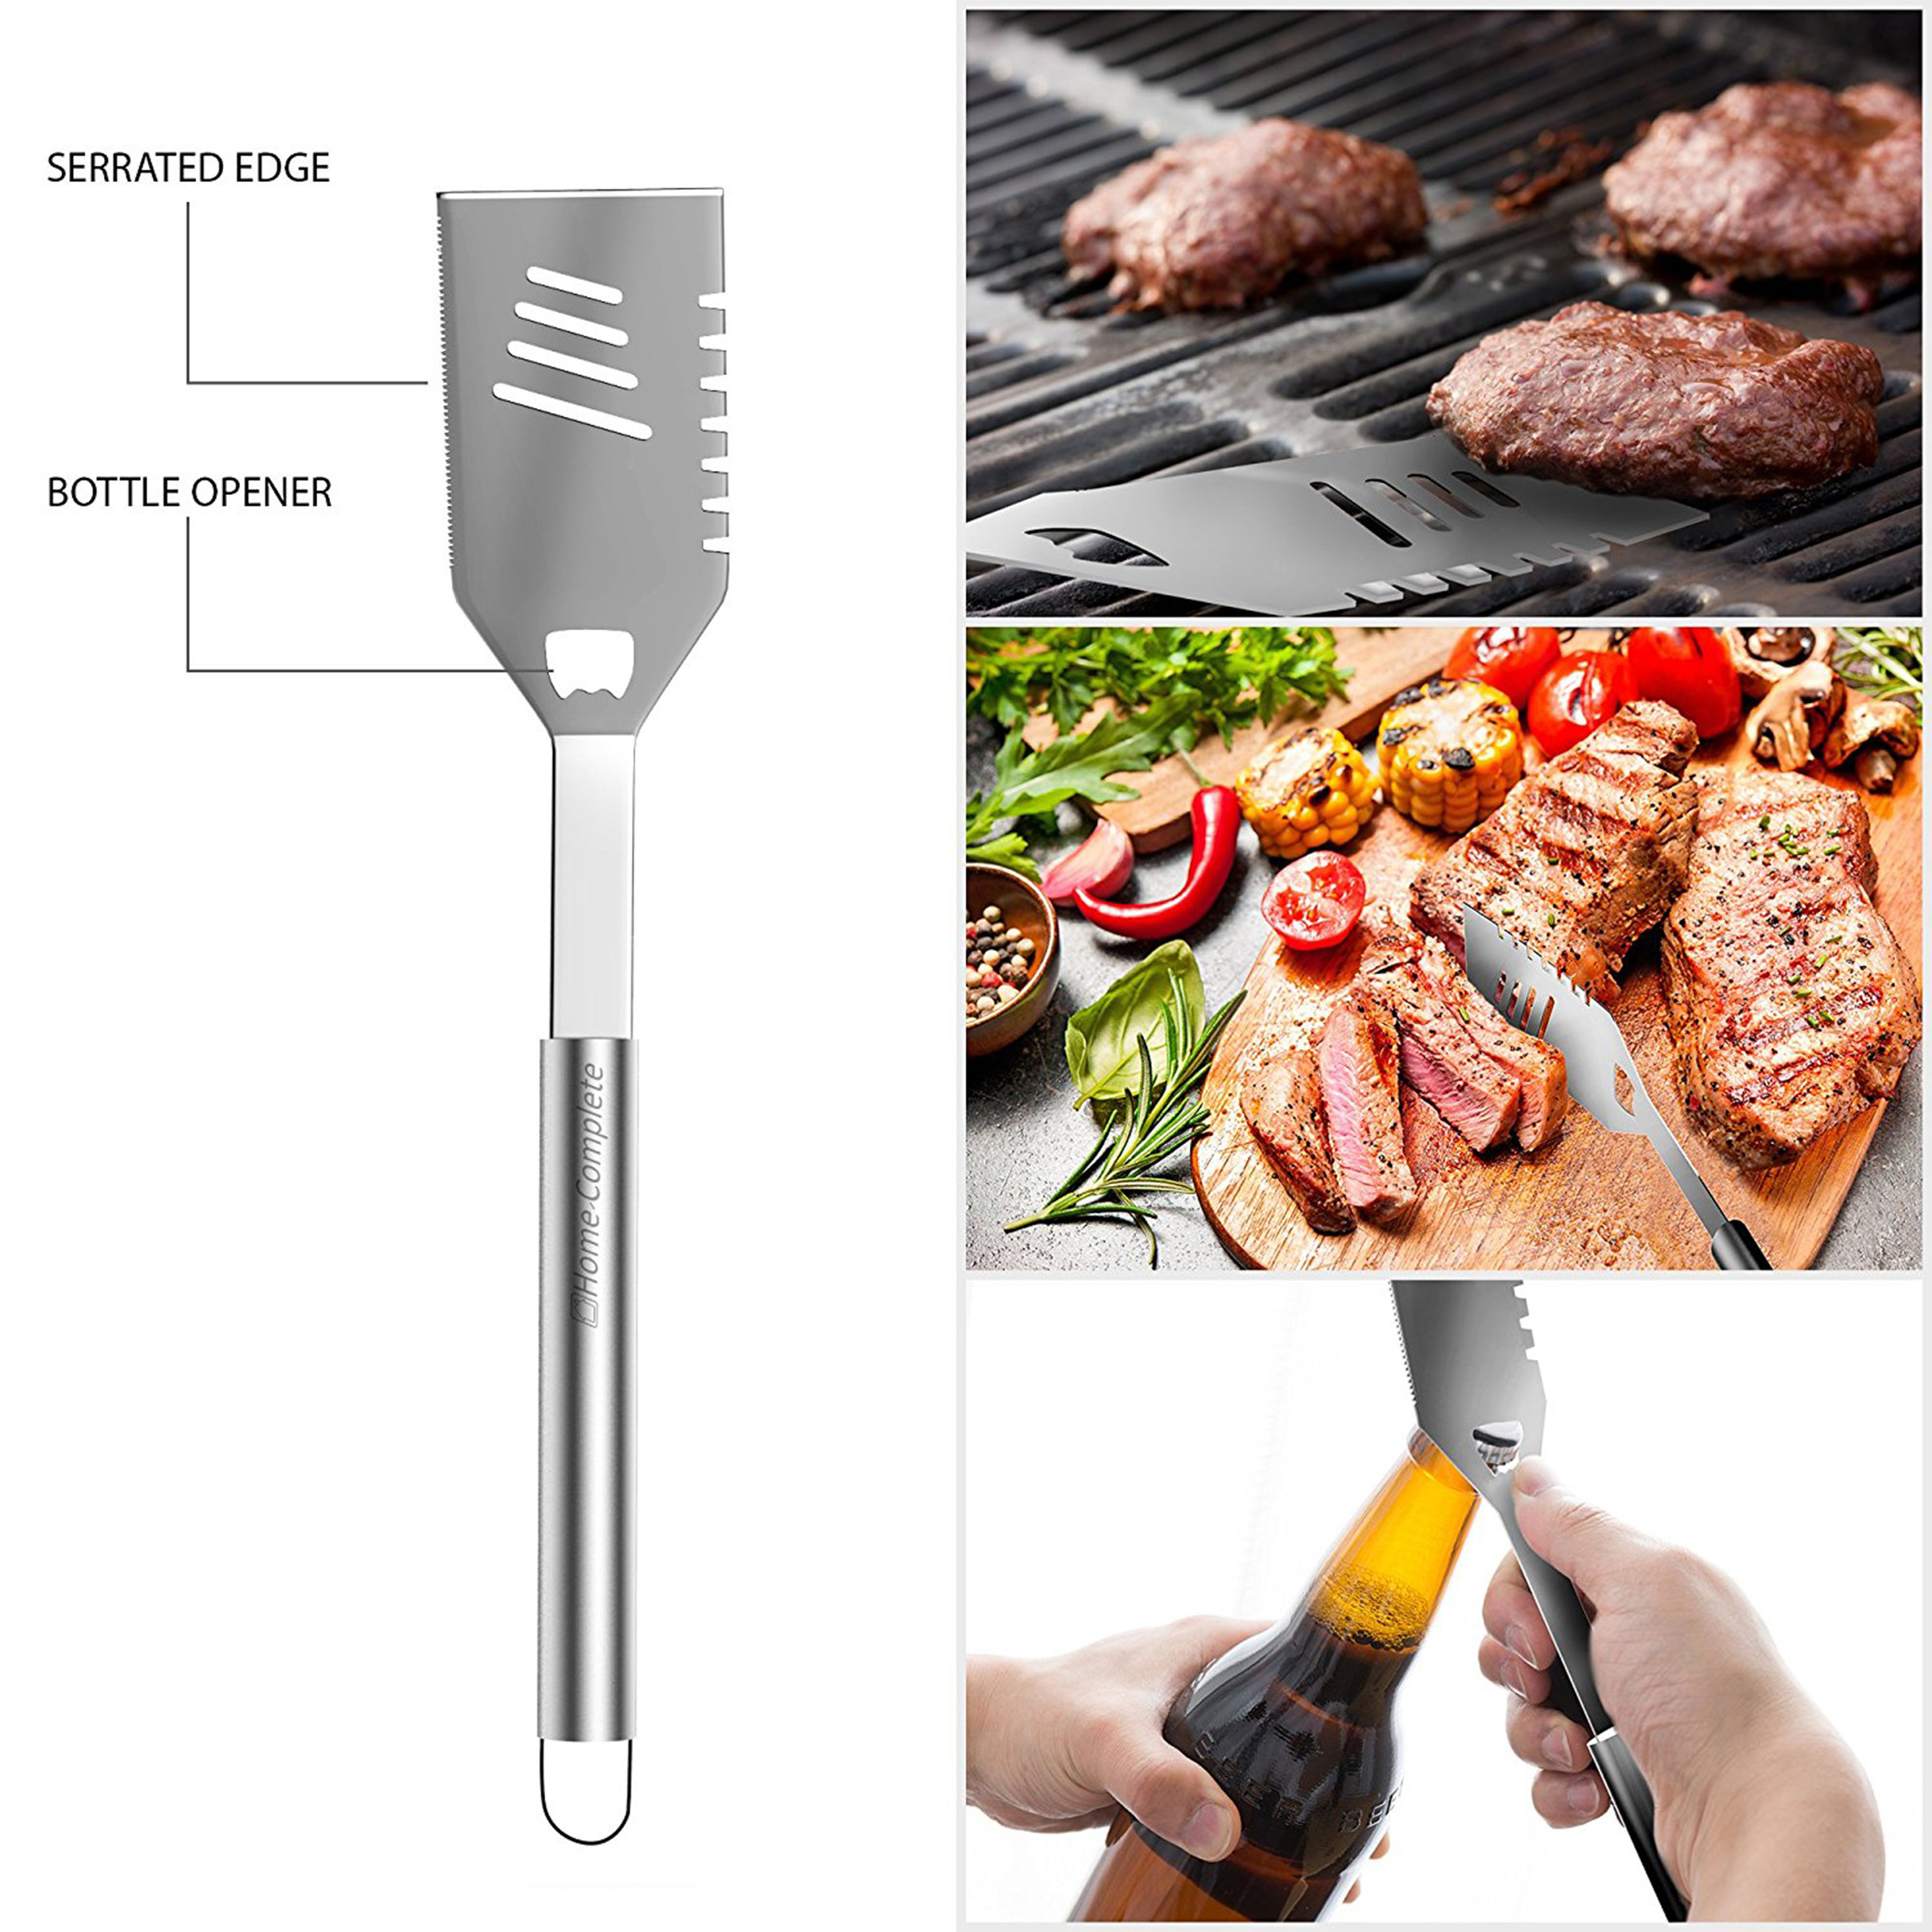 BBQ Grill Tool Set- 16 Piece High Quality Stainless Steel Barbecue Grilling Accessories with Aluminum Case Spatula Tongs Skewers By Home-Complete - image 3 of 8